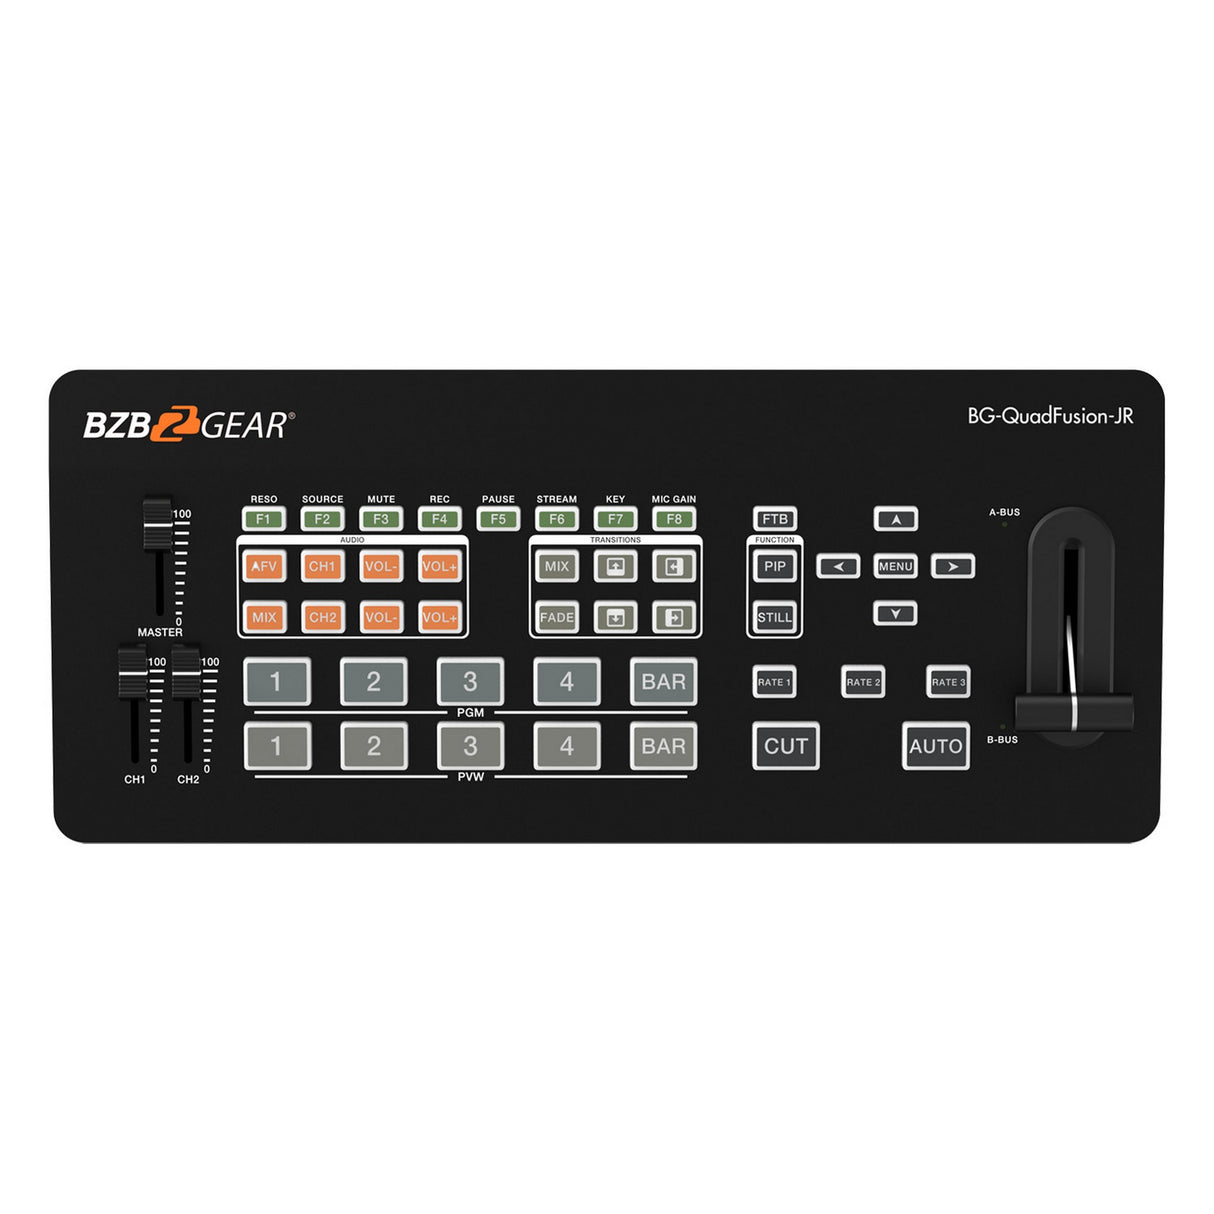 BZBGEAR BG-QuadFusion-Jr 4-Channel 1080p FHD Live Streaming HDMI/DP Switcher Mixer with PIP and USB 3.0 Capture Card